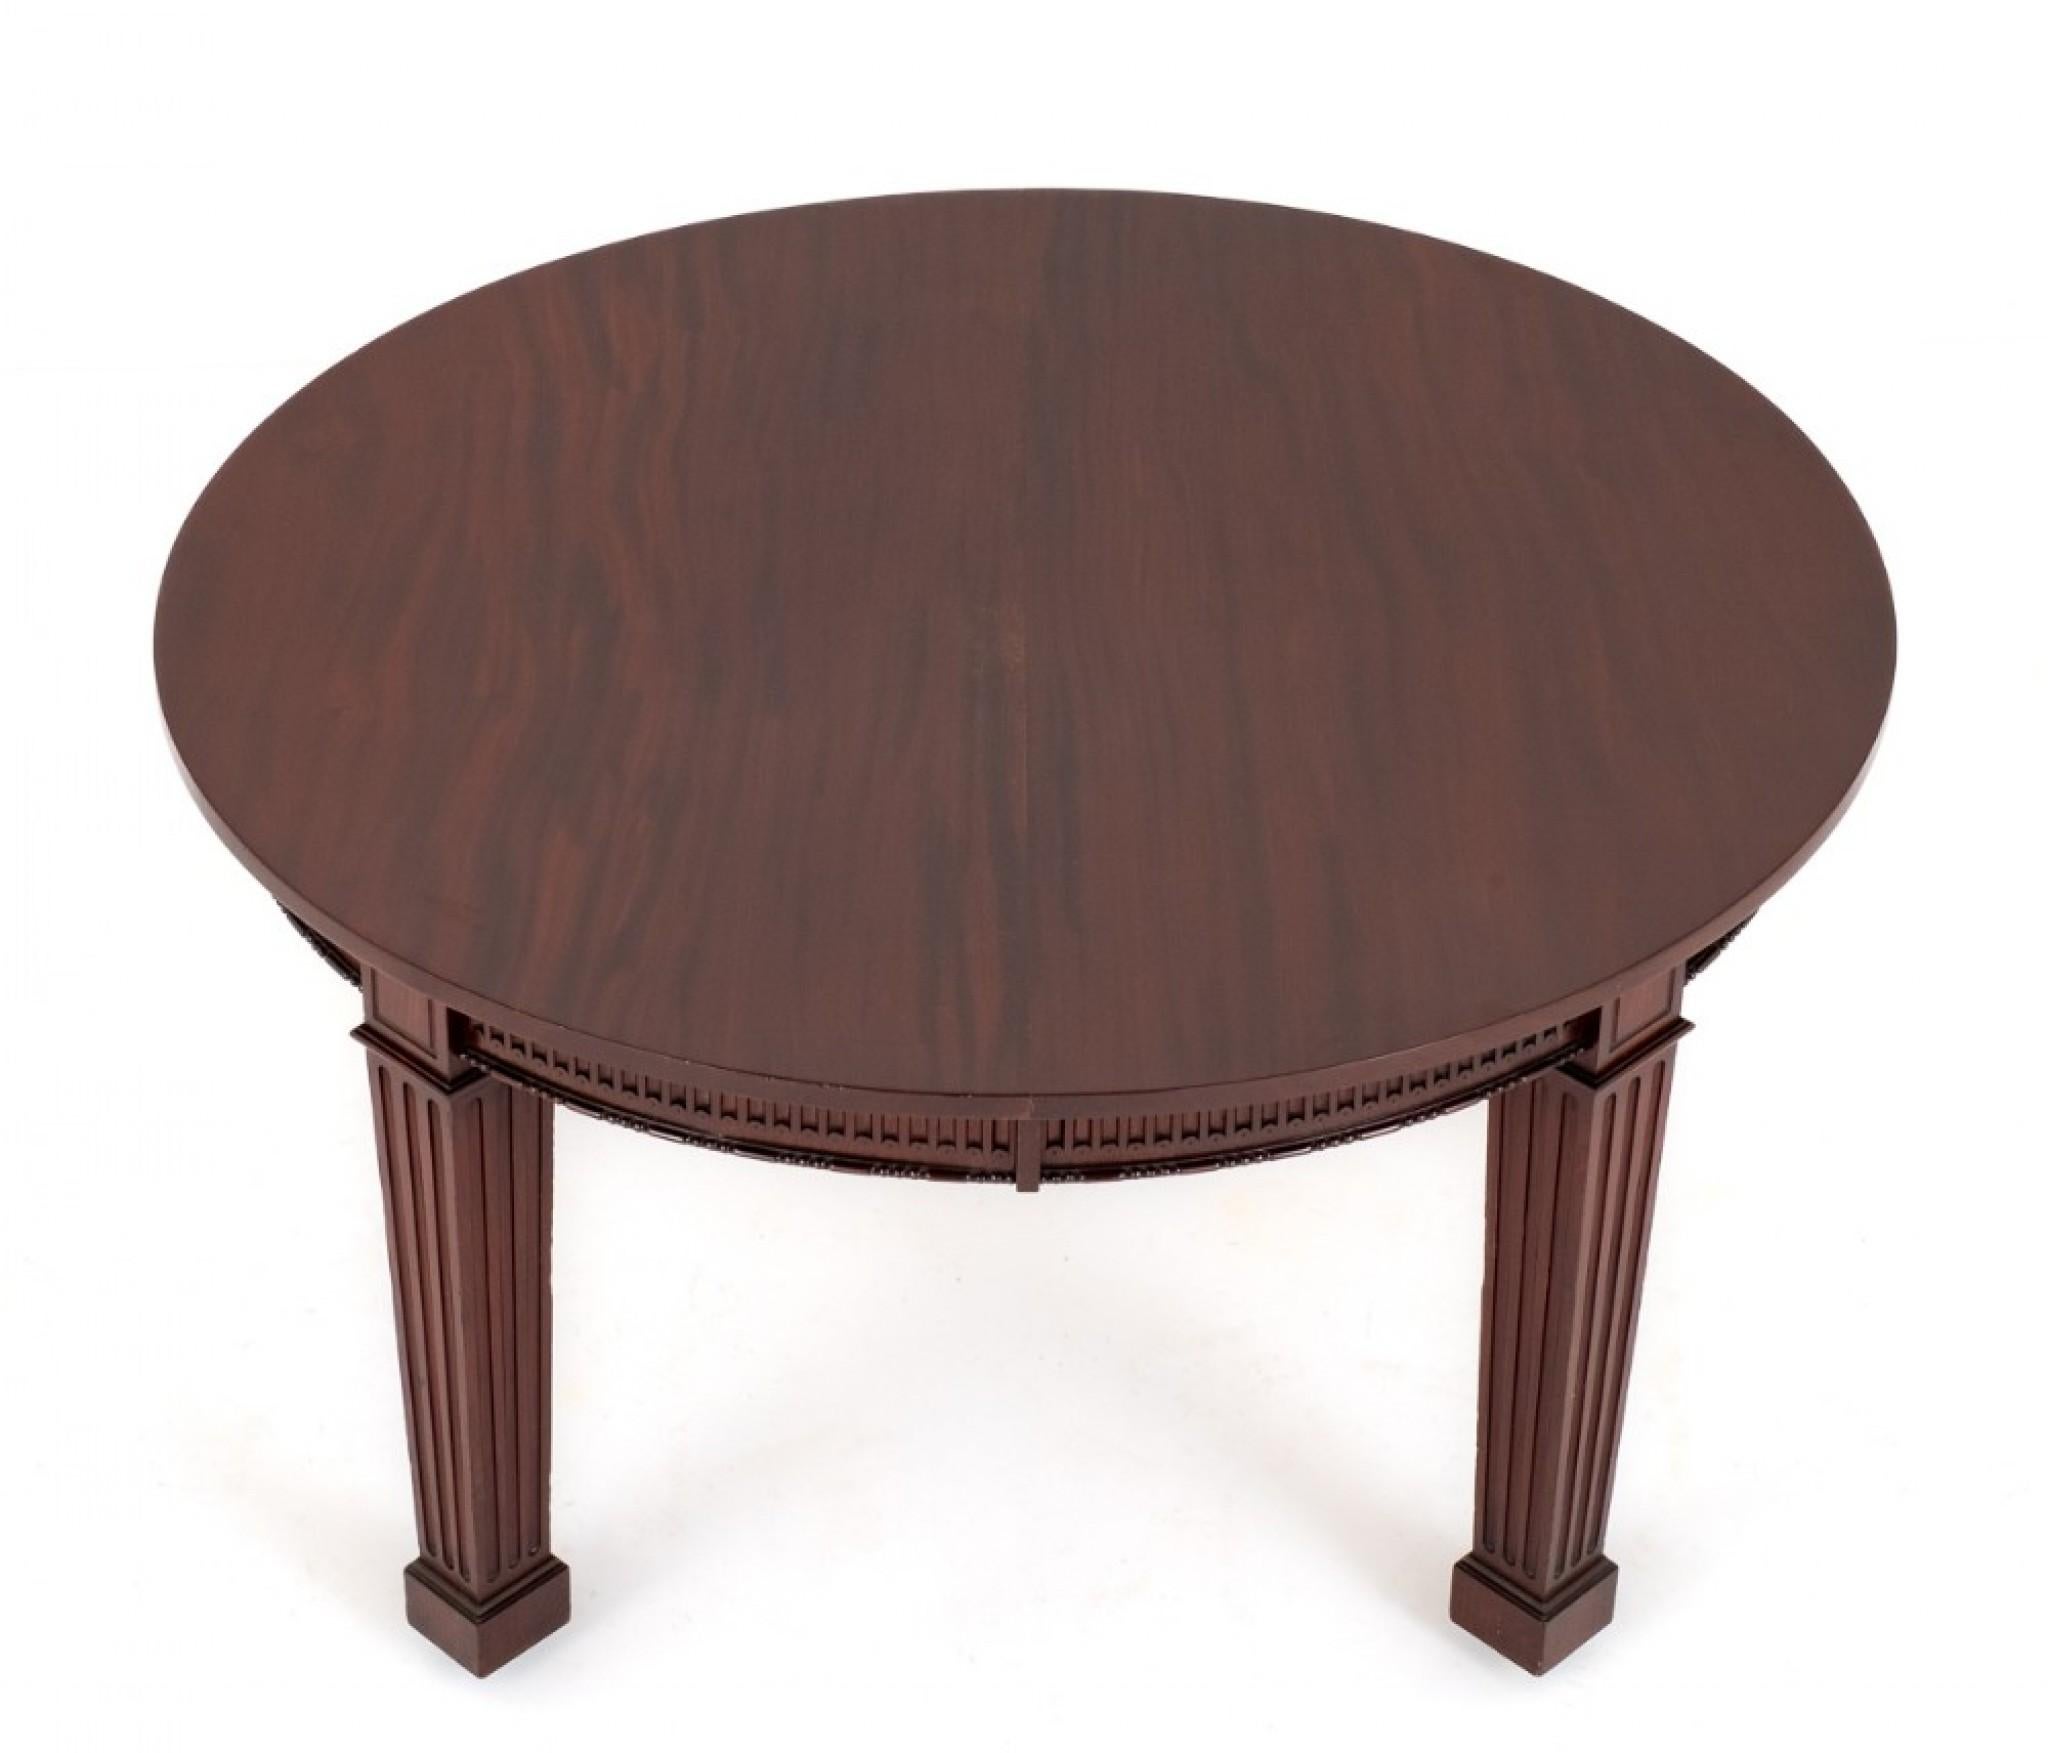 Period Victorian Dining Table Extending Mahogany 2 Leaf For Sale 2